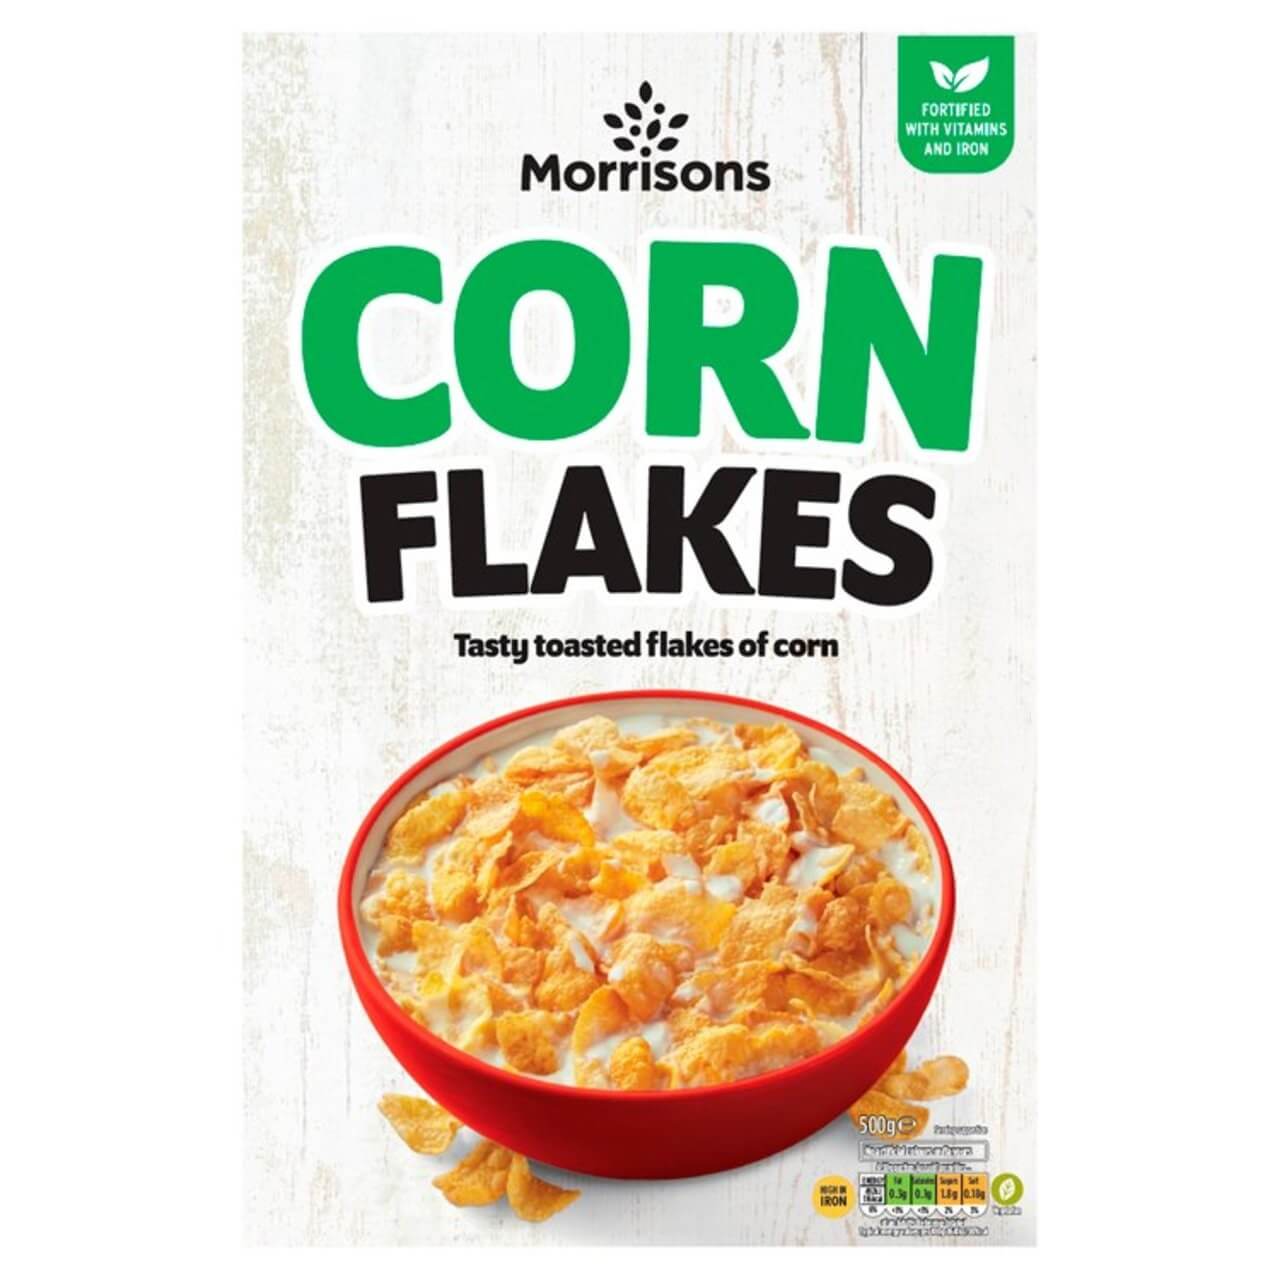 Image of Cornflakes made in the UK by Morrisons. Buying this product supports a UK business, jobs and the local community